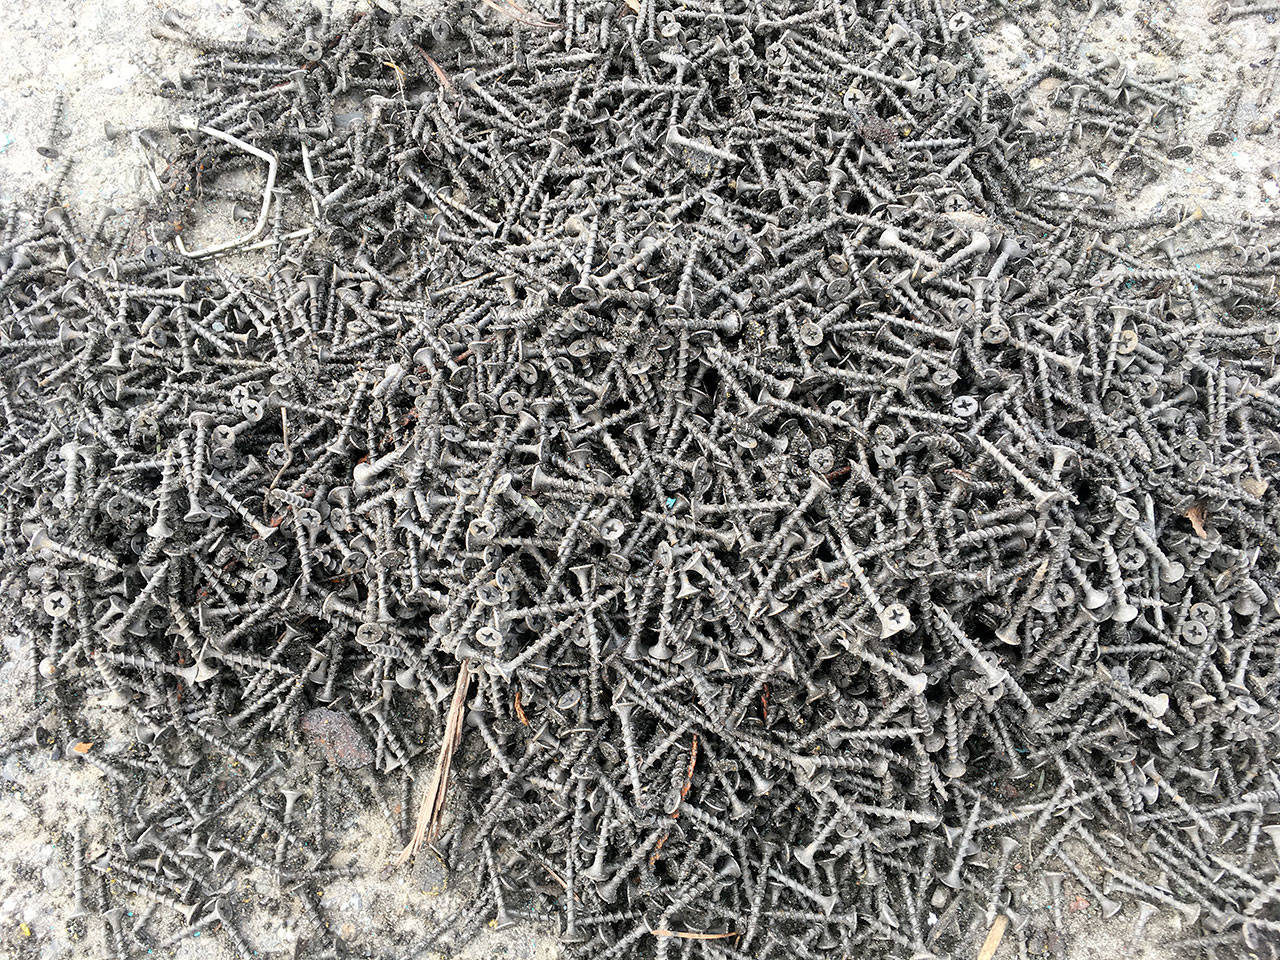 Crews with the state Department of Transportation recovered hundreds of screws from U.S. Highway 101 east of Port Angeles. Photo courtesy of State Patrol